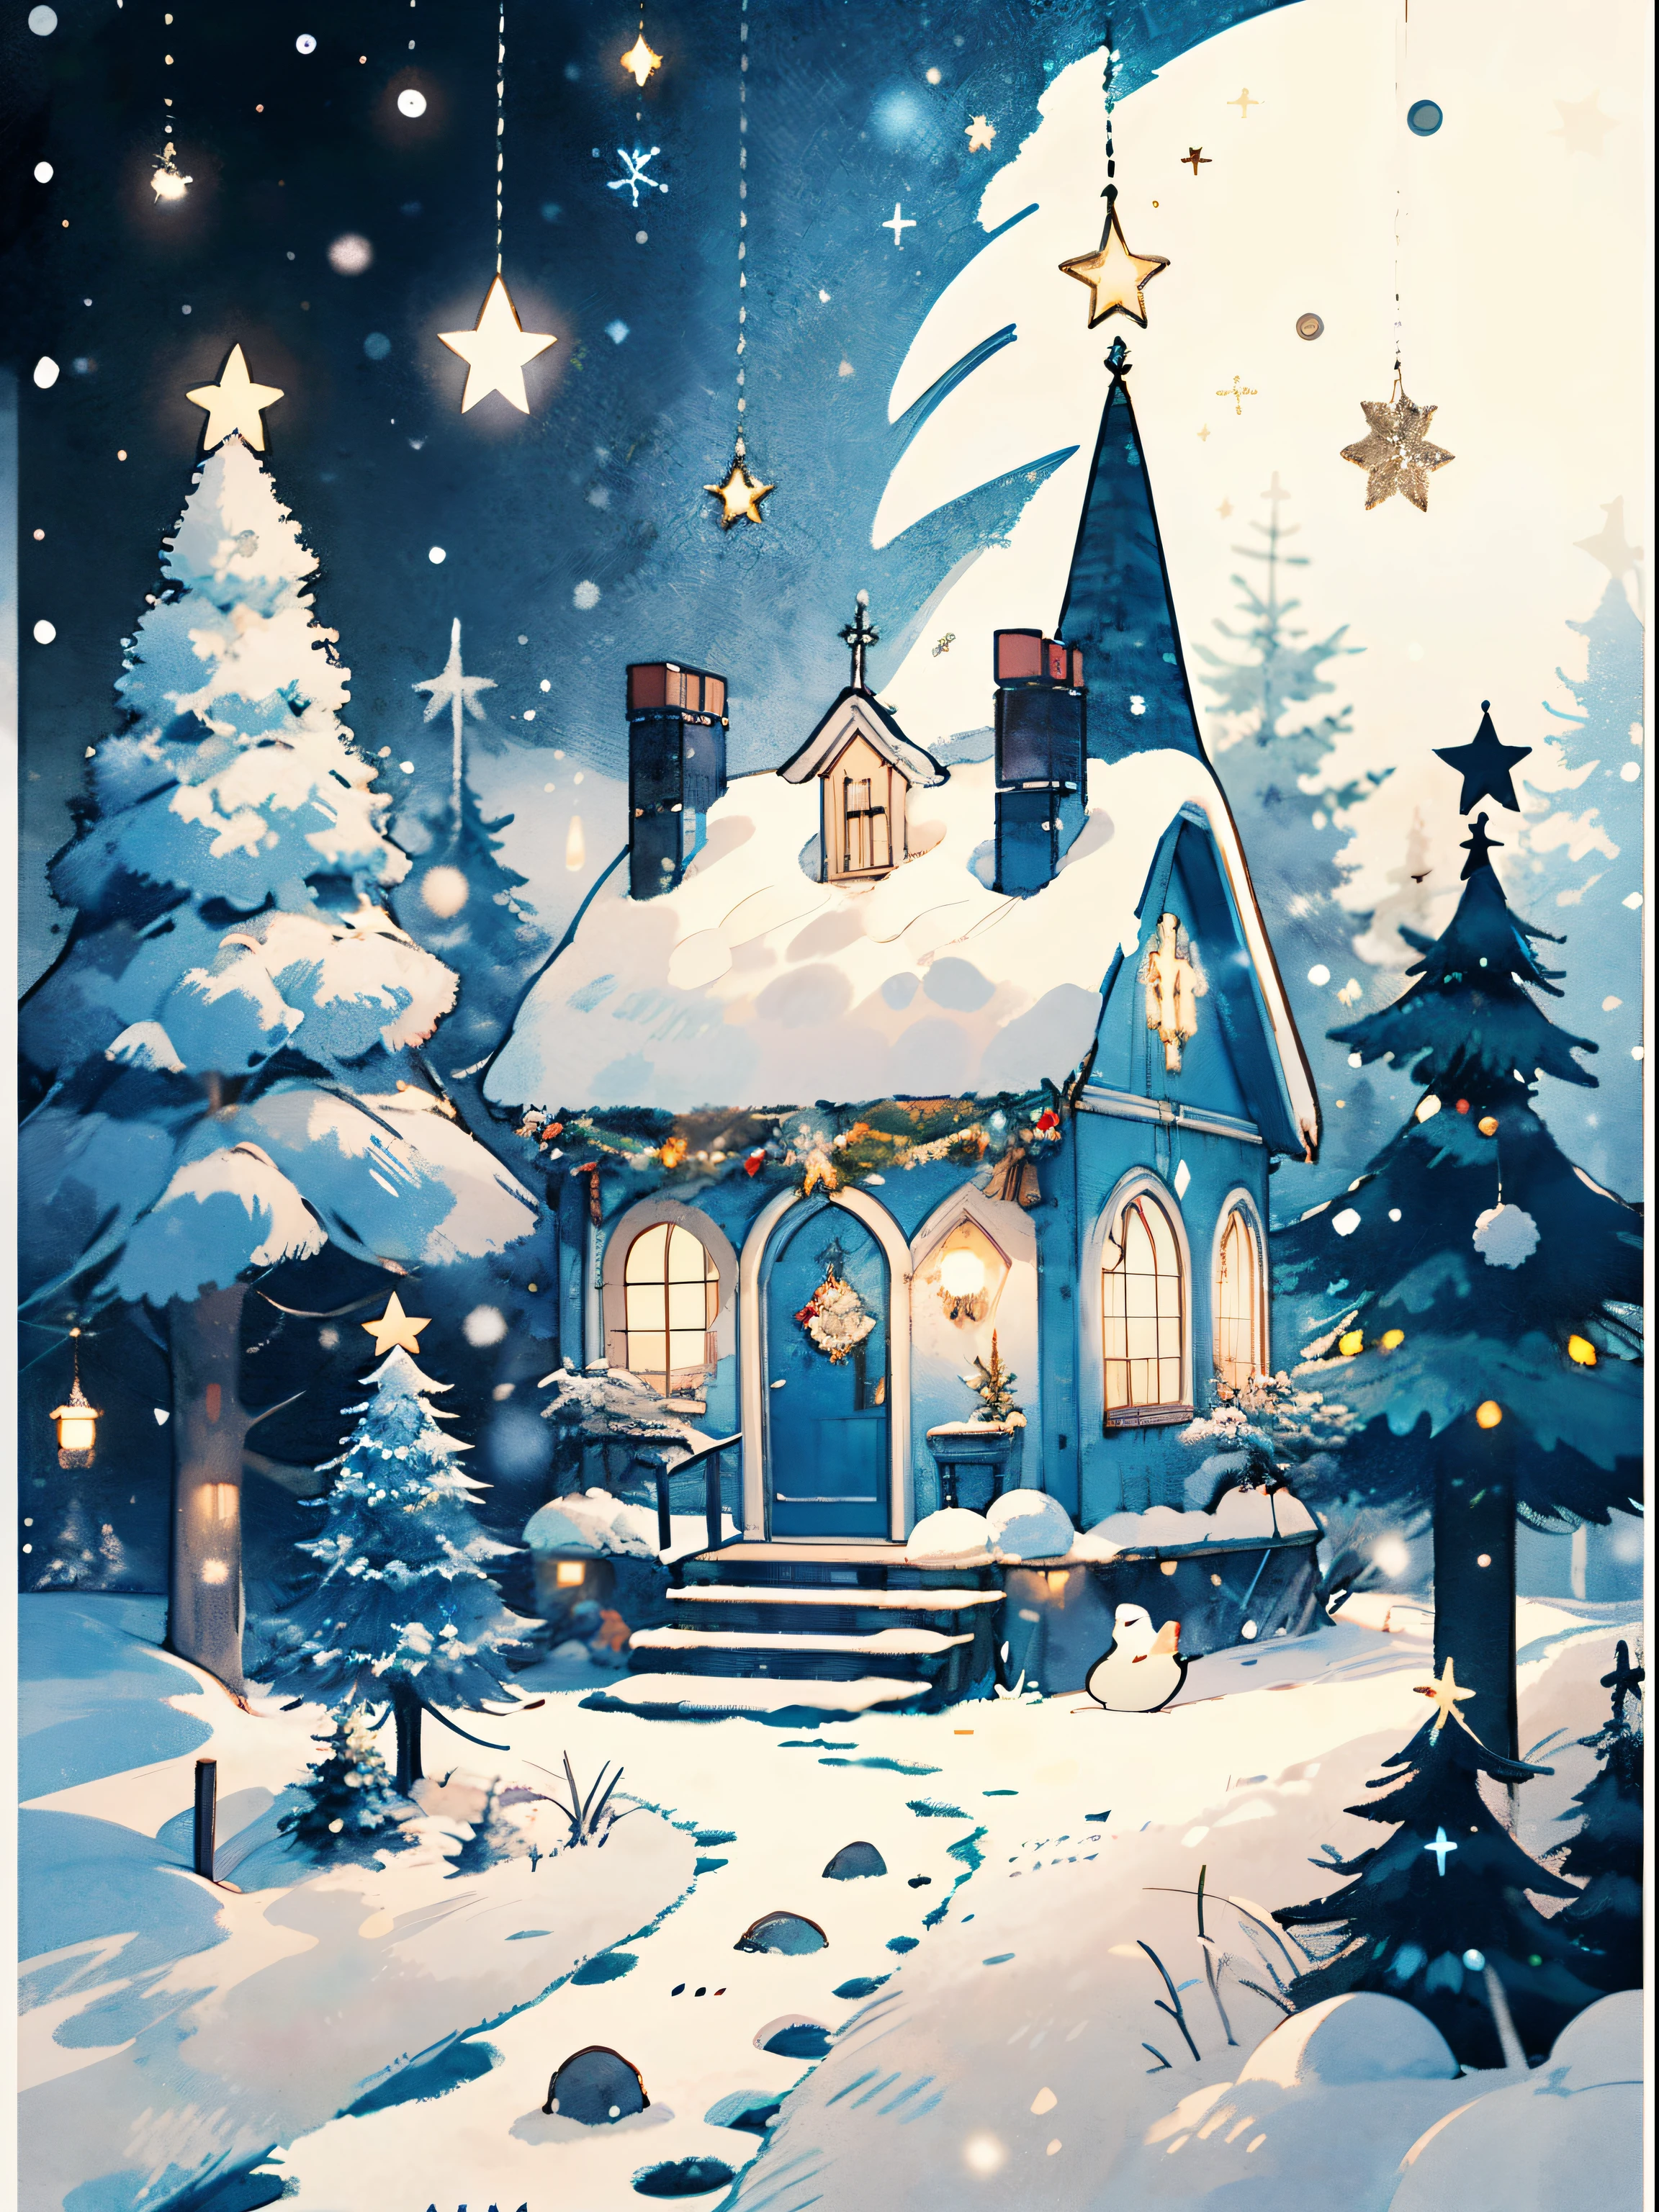 (((Masterpiece))),Best Quality, Whitetown, Russian New Year, Salutes , Bright color, snowing, Christmas tree, balls on the Christmas tree, Cabin in the woods, New Year's Eve